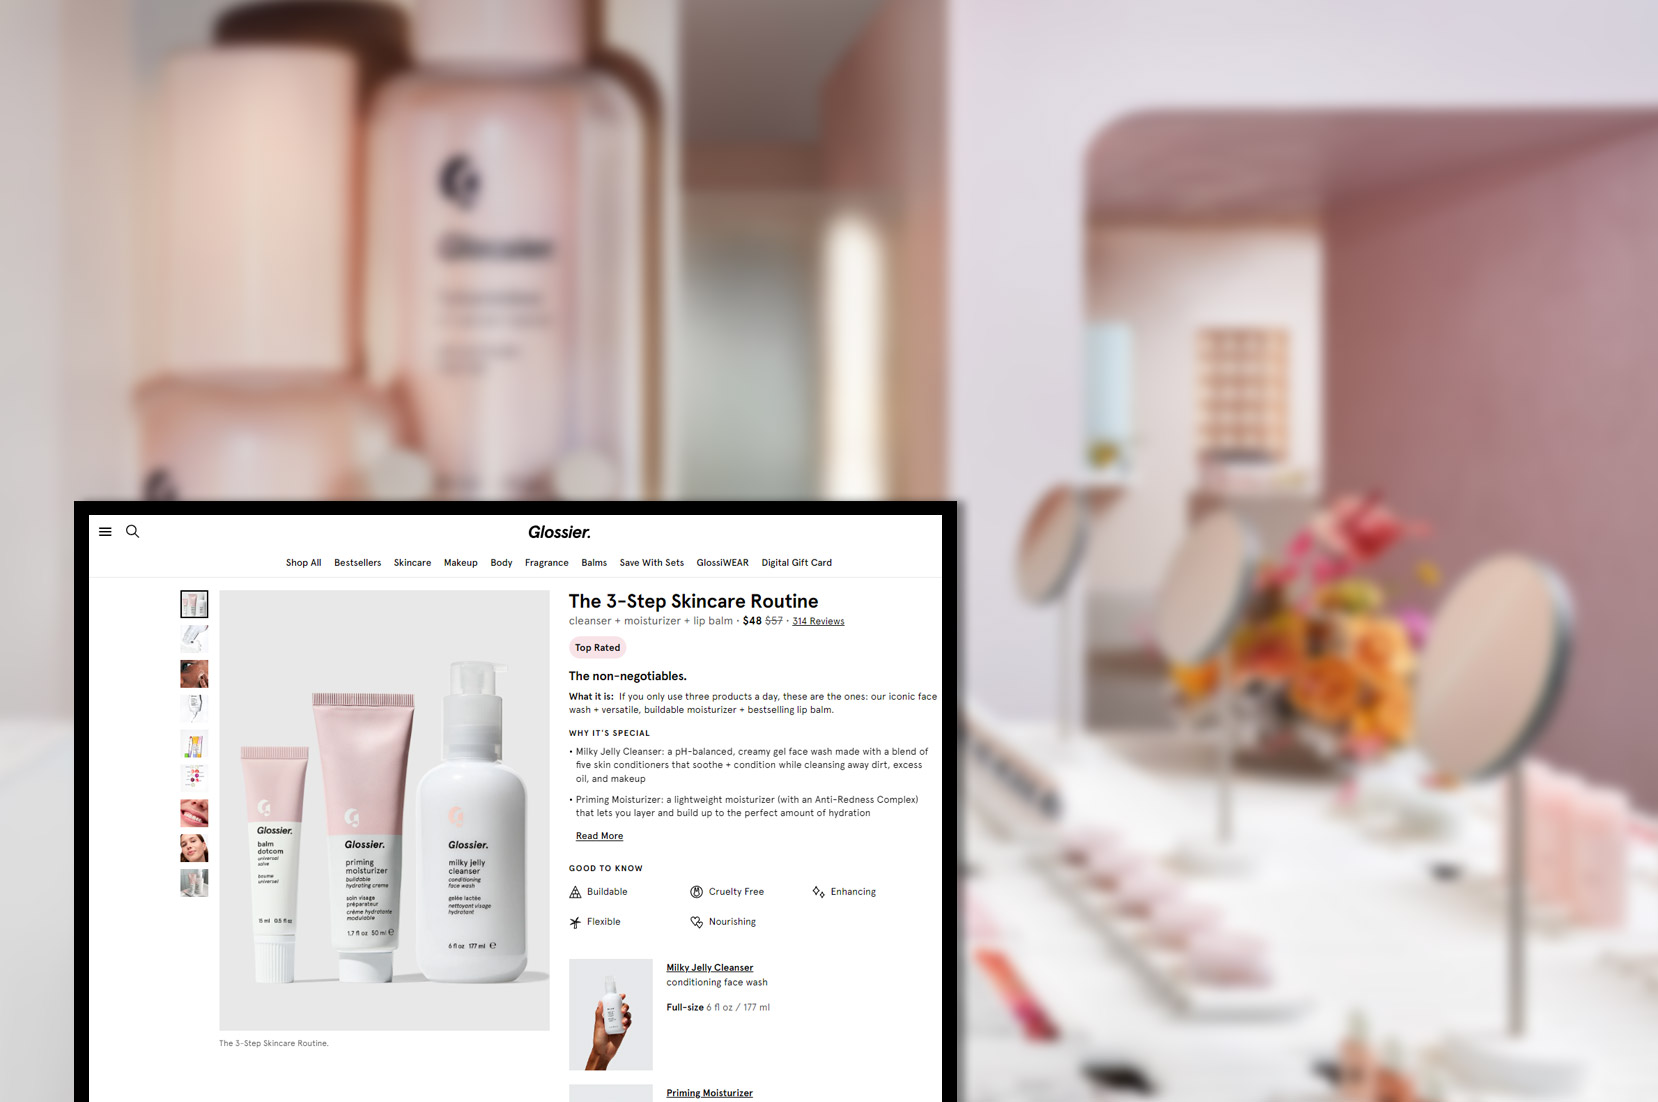 glossier-comproduct-pricing-information-and-image-scraping-services